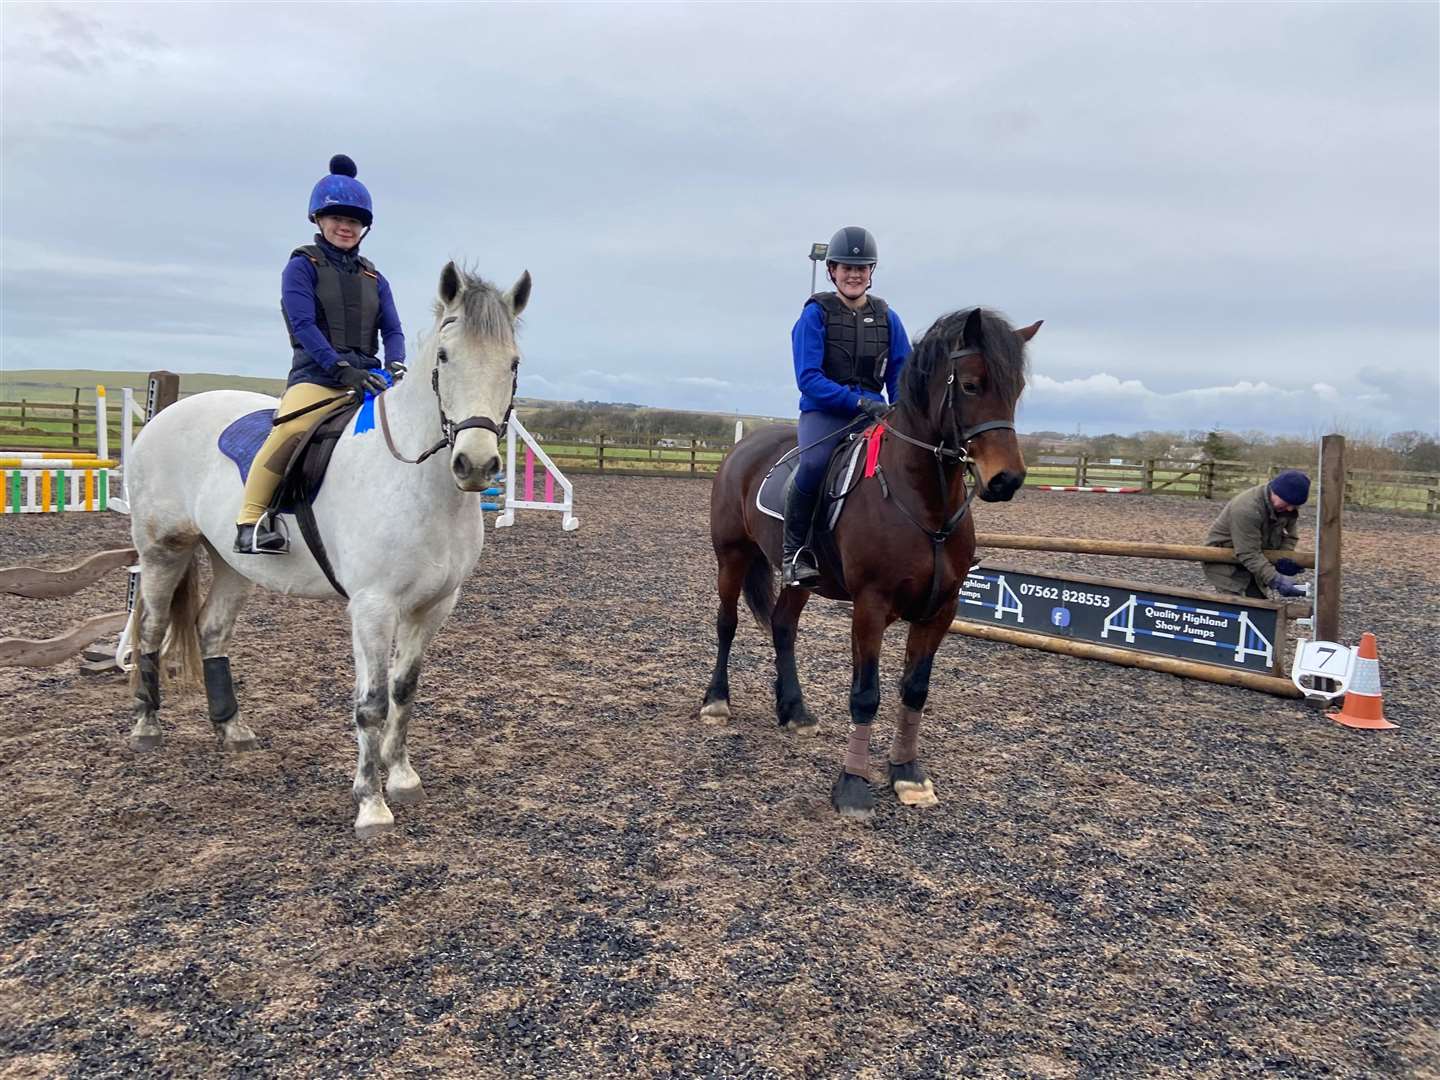 Leoni Kennedy on Derry (left) and Morven Mackenzie on Cilla.